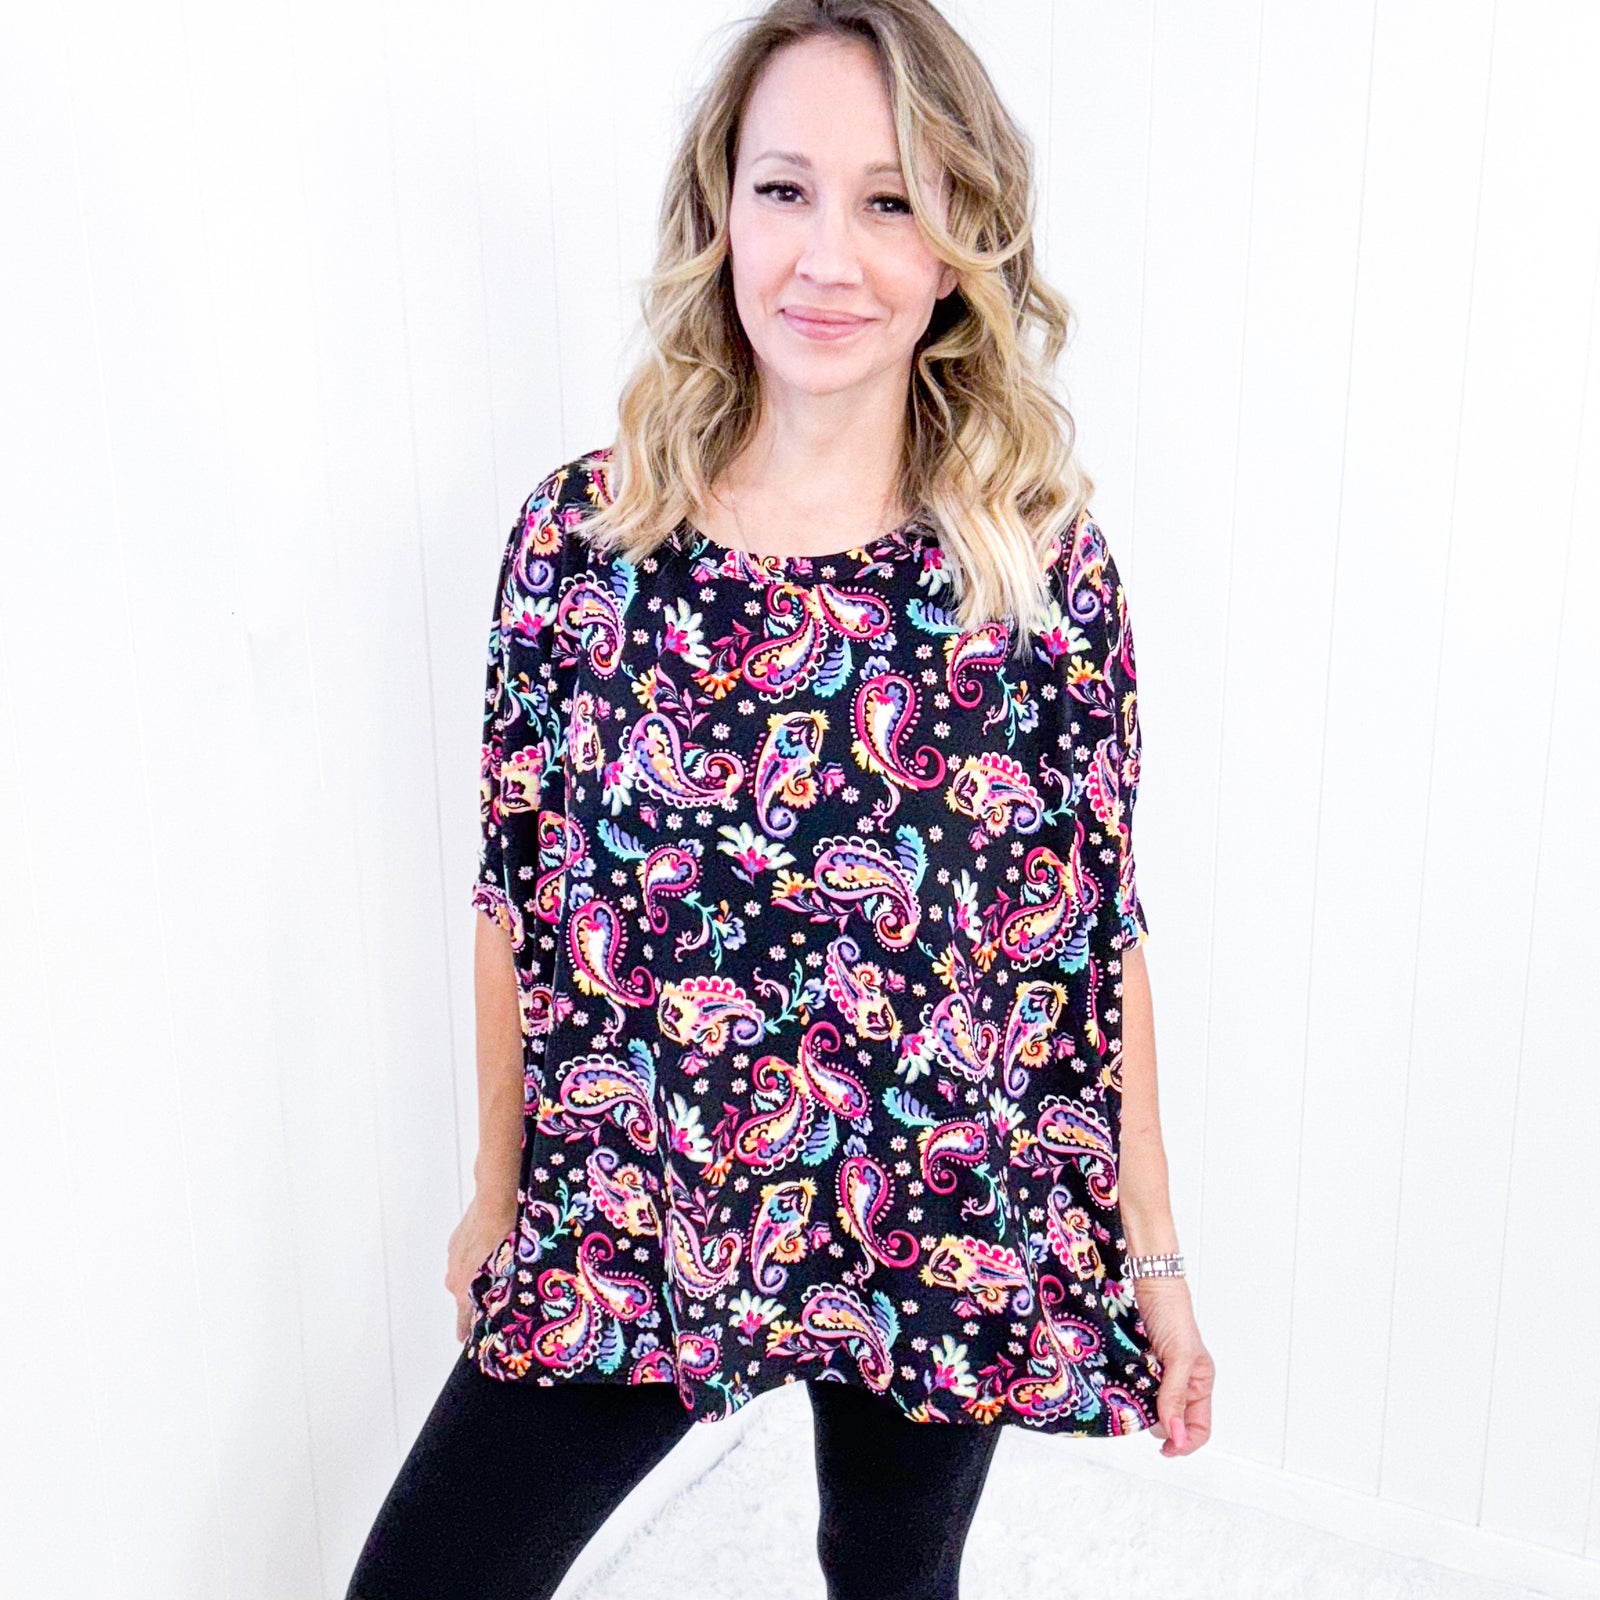 Dear Scarlett Essential Blouse in Black and Pink Paisley - Boujee Boutique 